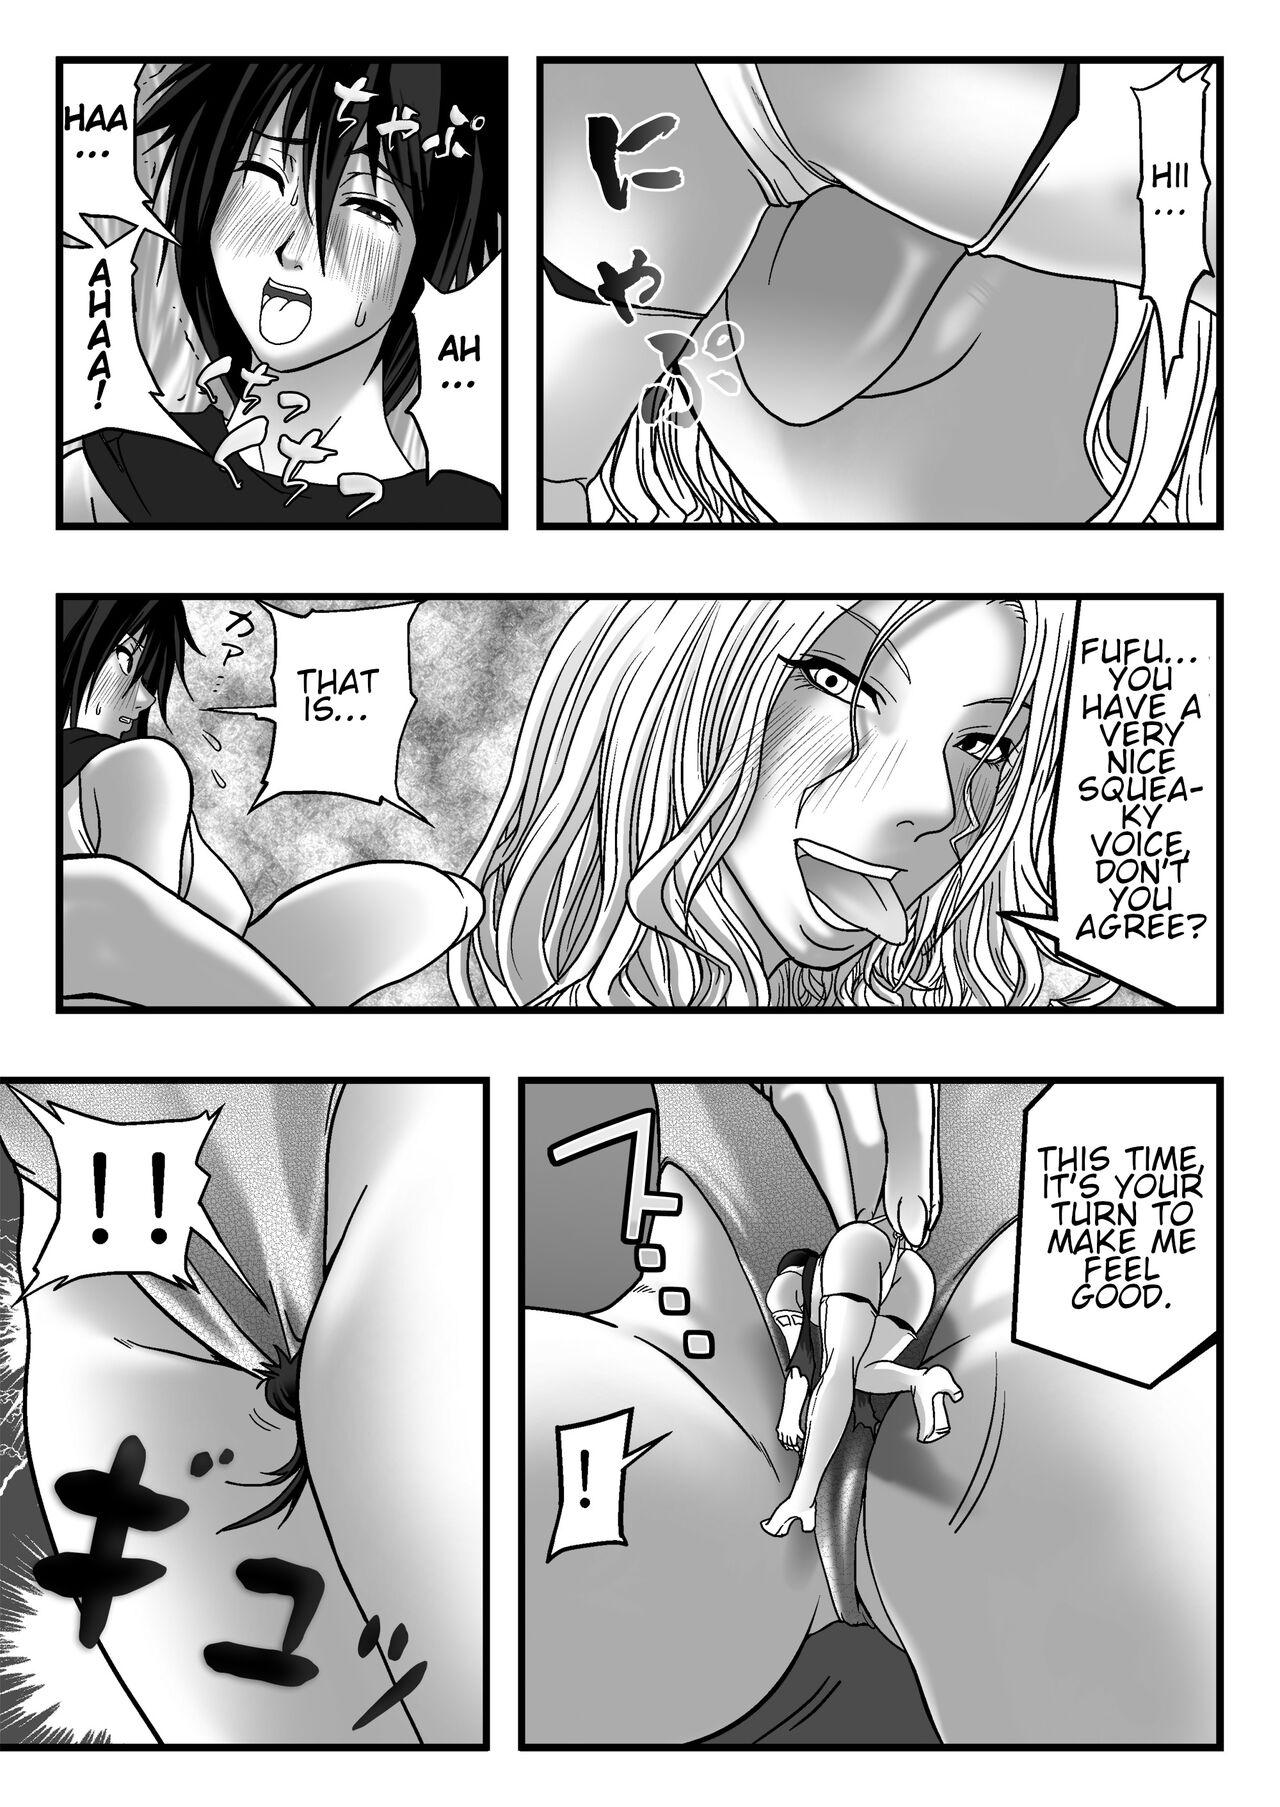 Sola Size Fetish Comic Vol.3 - Original Foreplay - Page 6